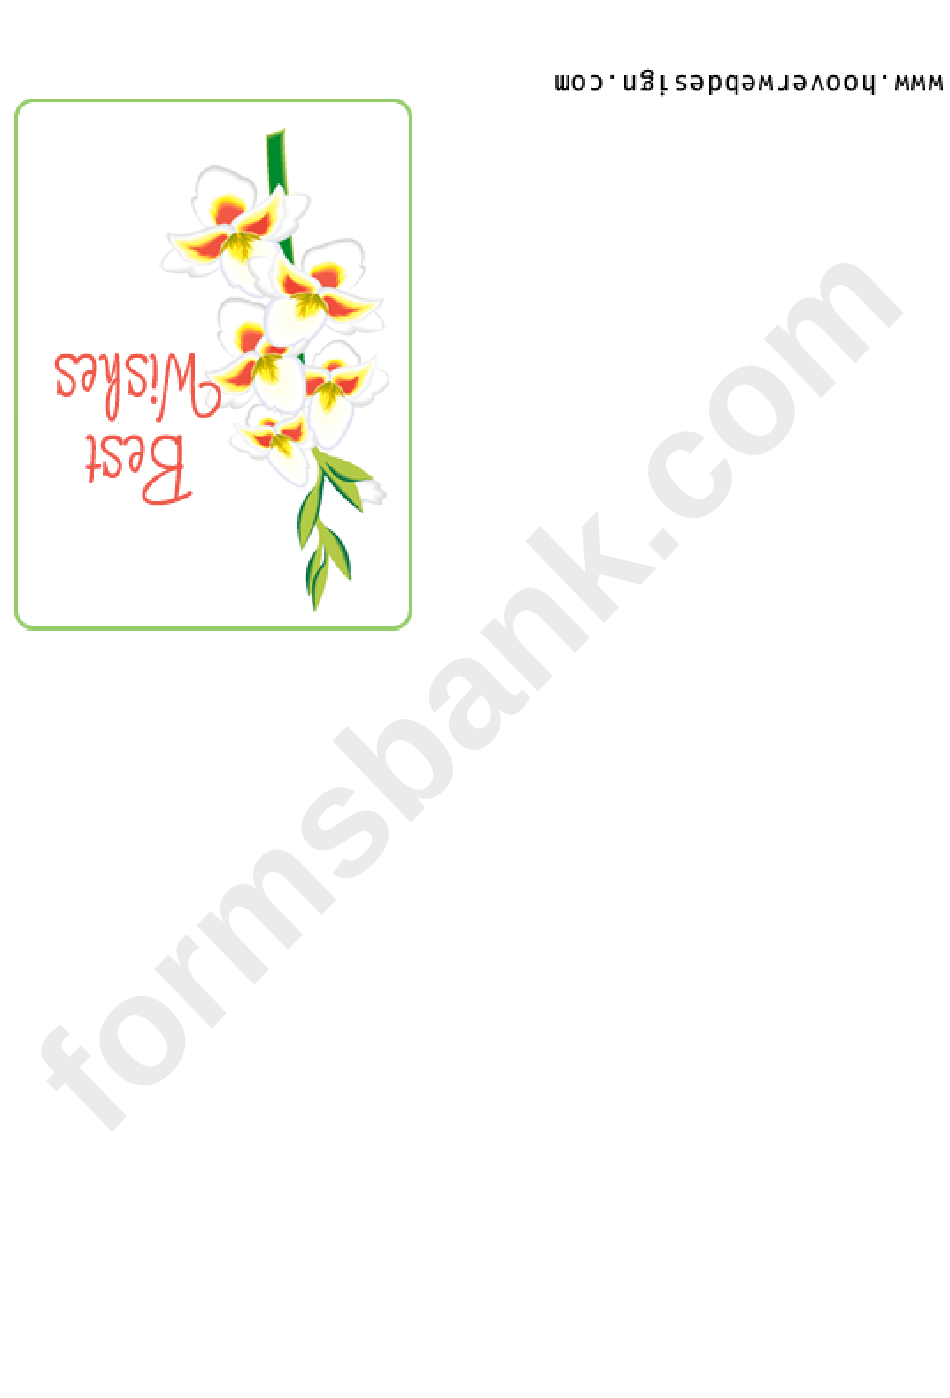 Best Wishes - Card Template